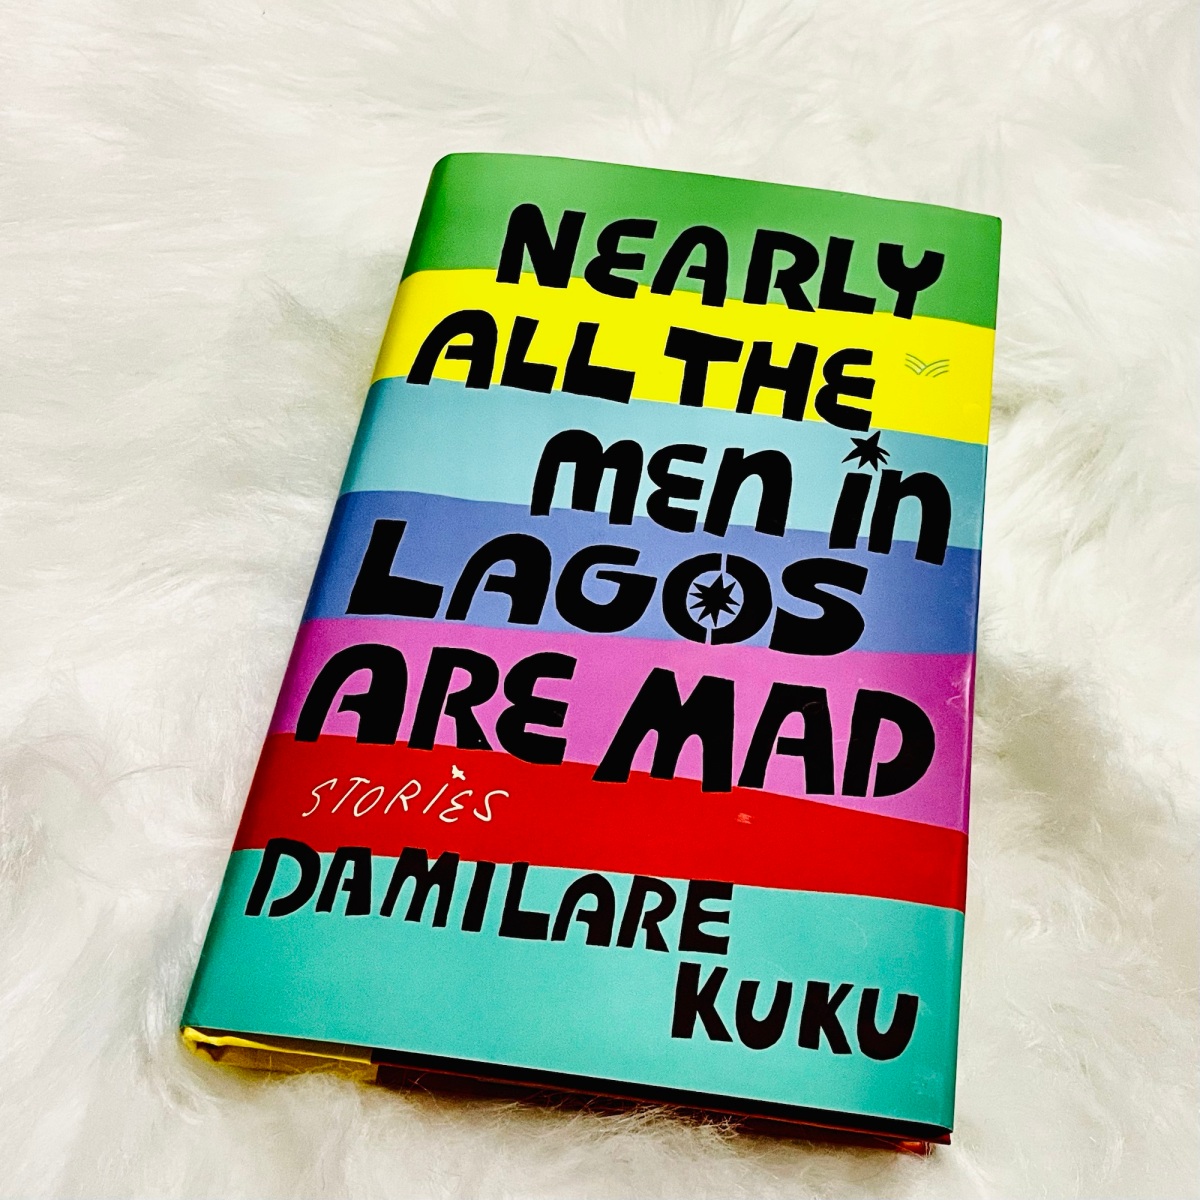 About the Men in Lagos